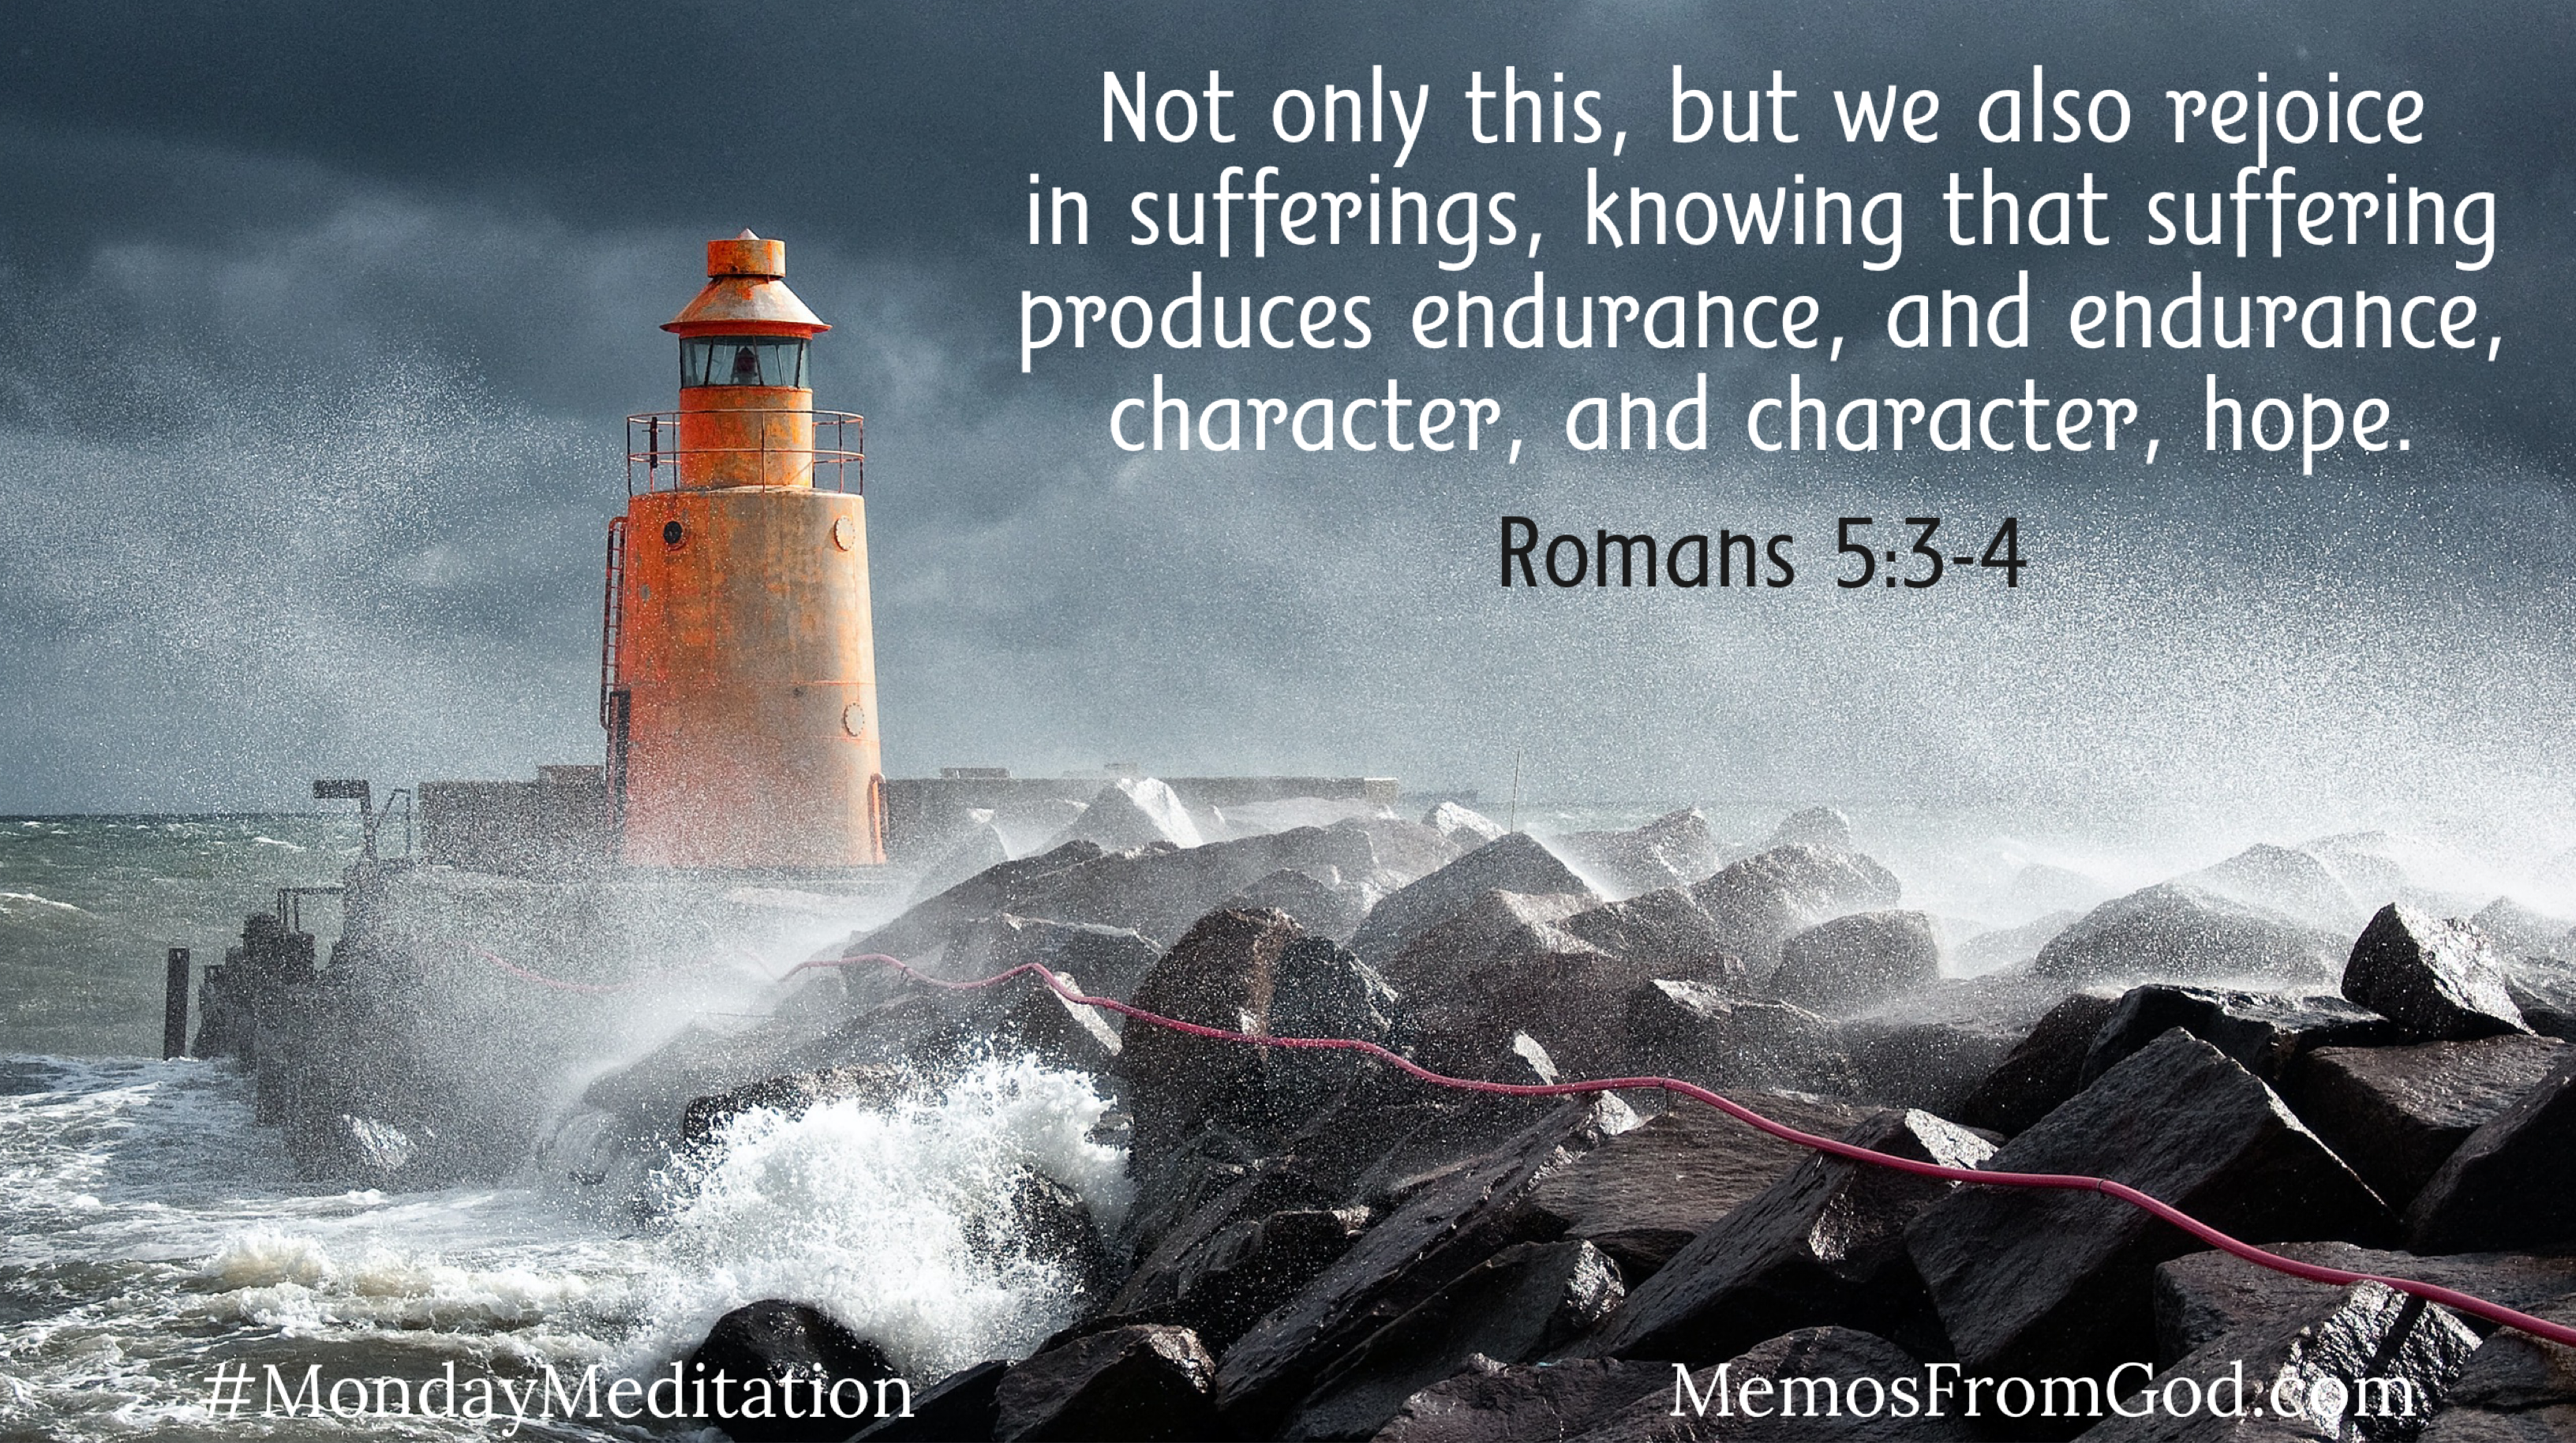 Not only this, but we also rejoice in sufferings, knowing that suffering produces endurance, and endurance, character, and character, hope. Romans 5.3-4